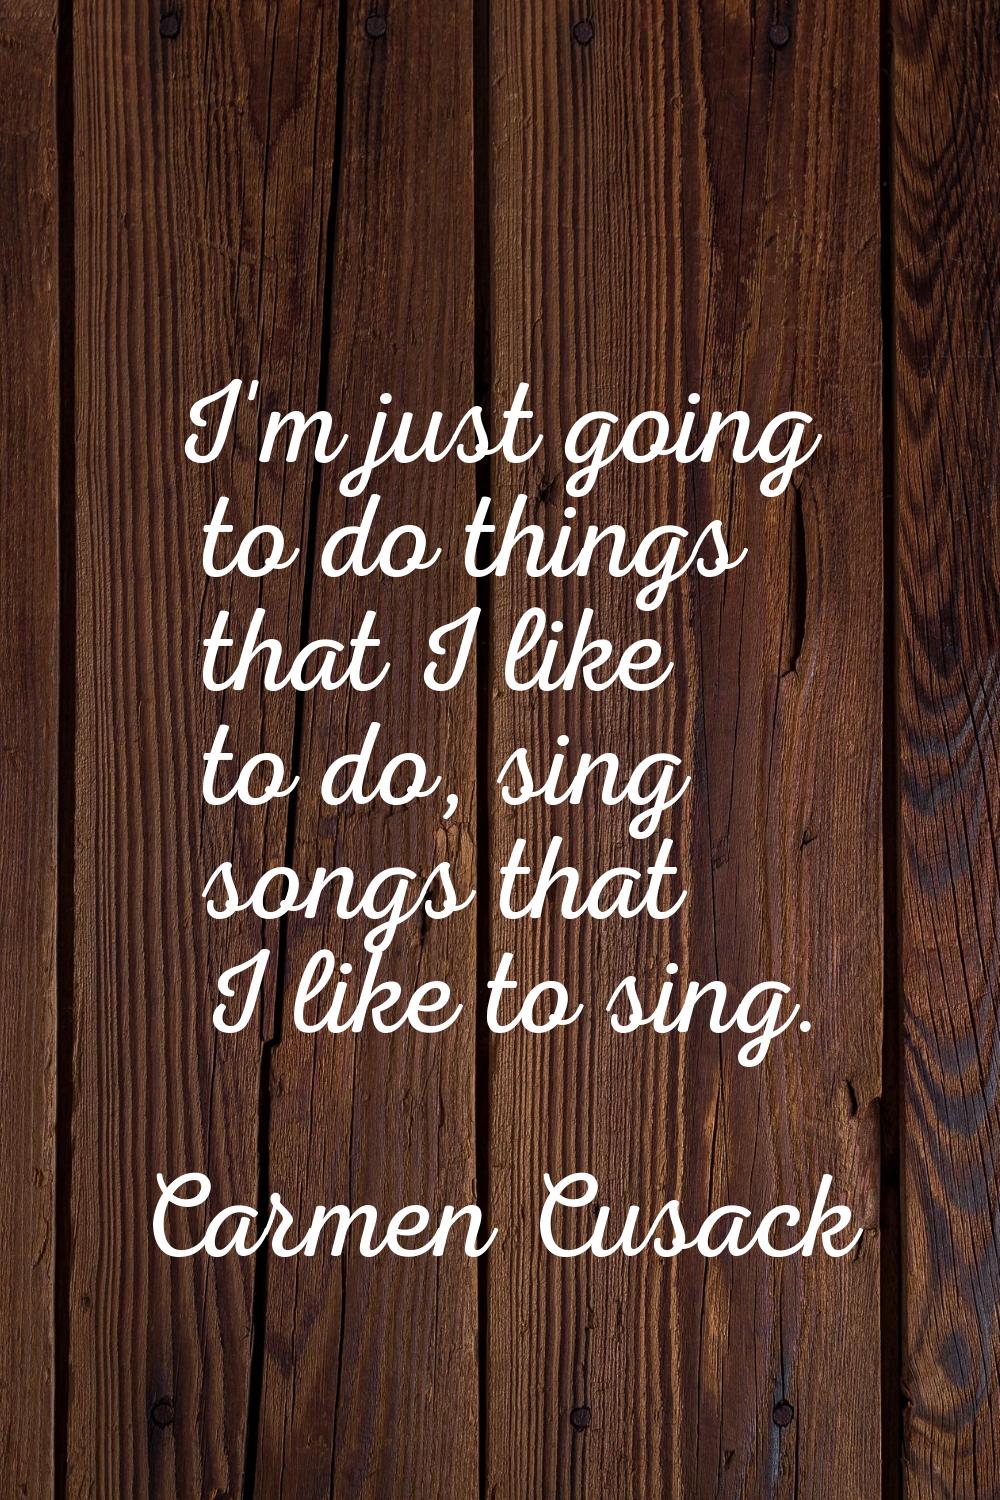 I'm just going to do things that I like to do, sing songs that I like to sing.